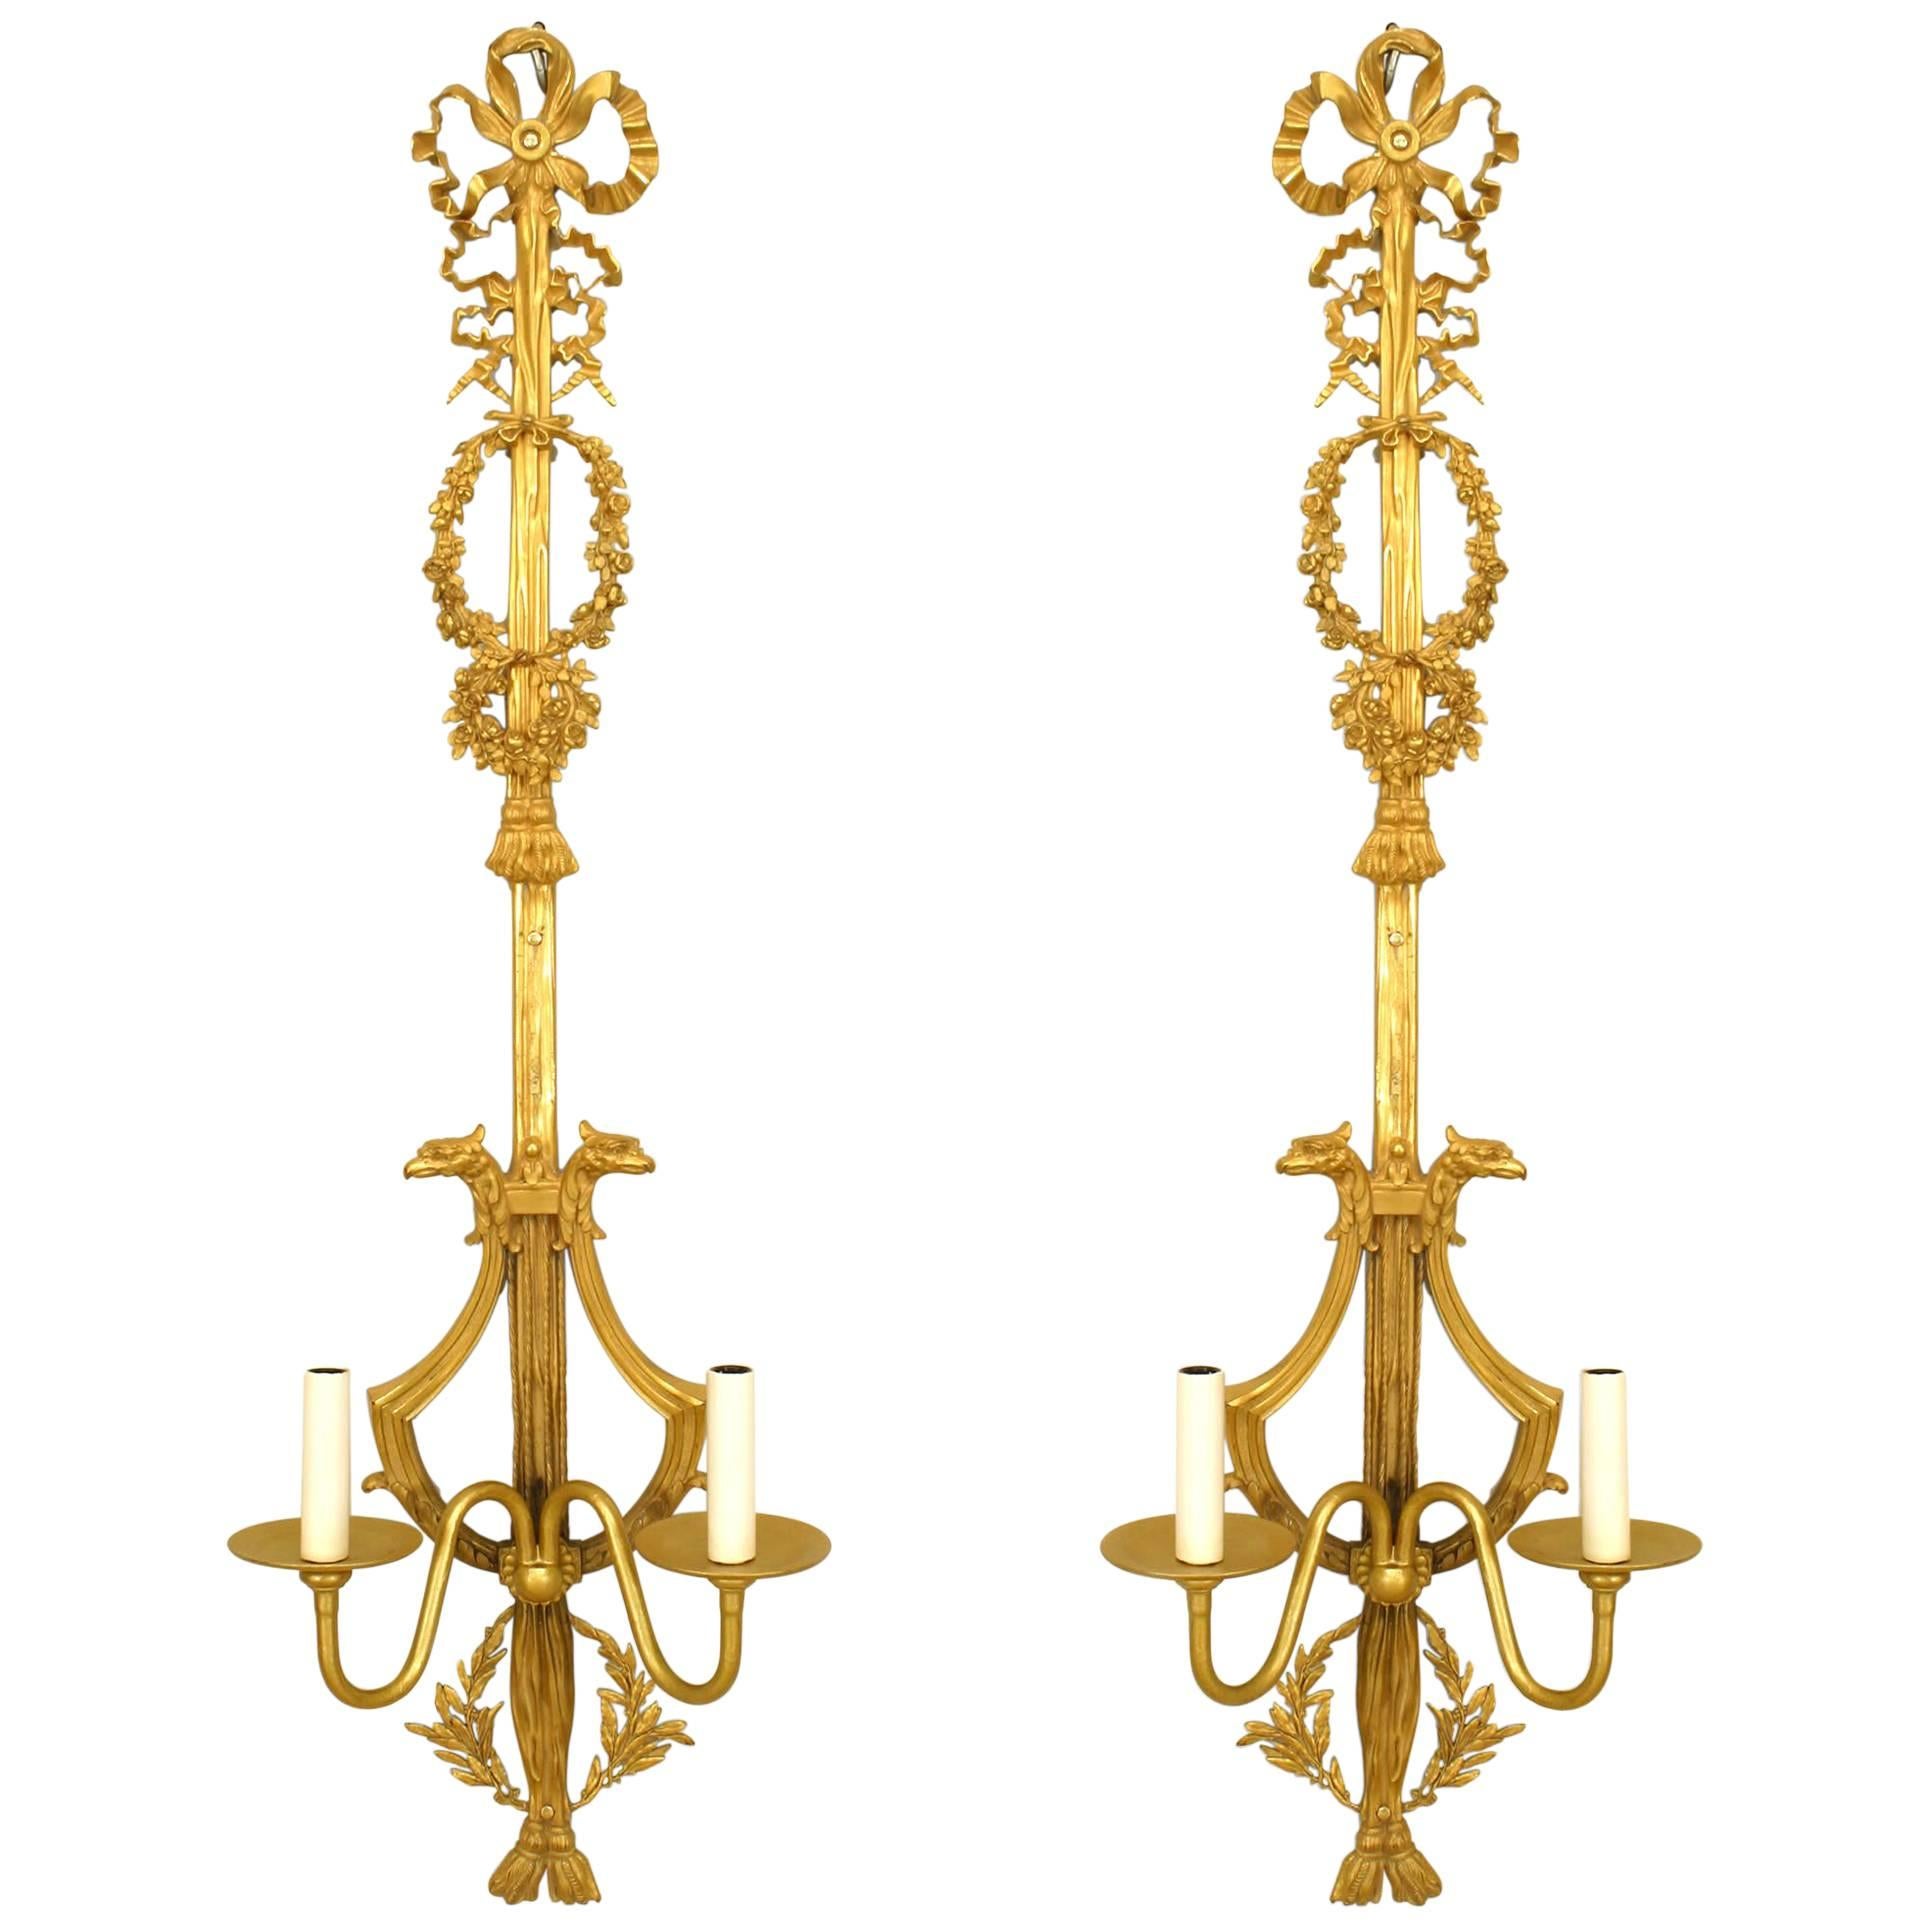 Pair of French Louis XVI Style Gilt Wall Sconces